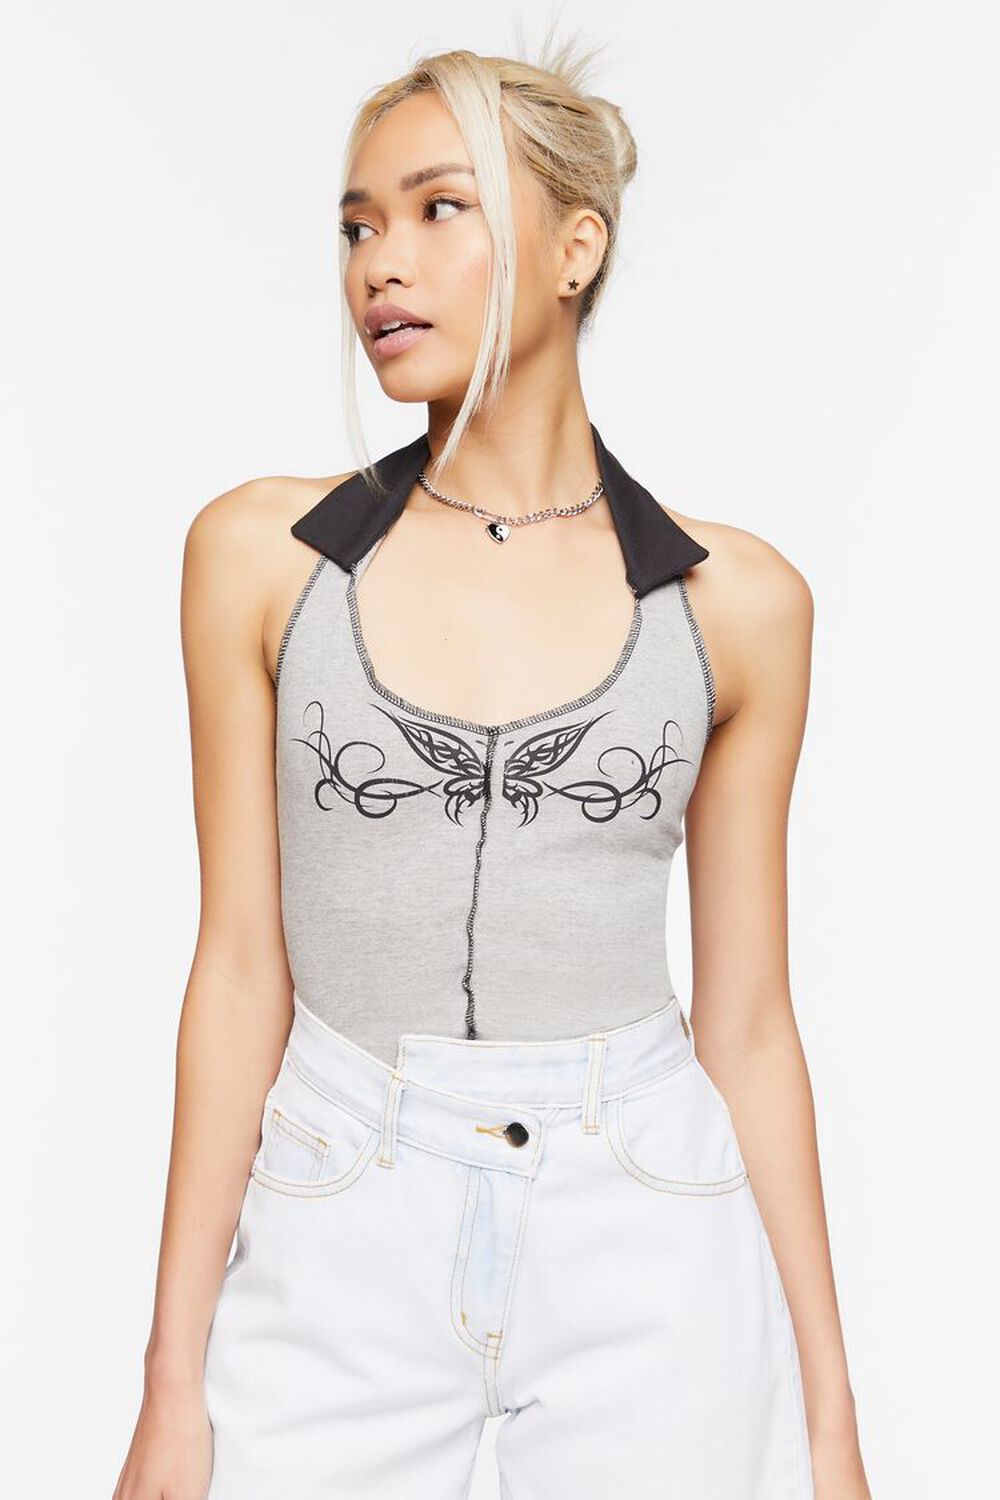 GREY/BLACK Butterfly Graphic Halter Top, image 1